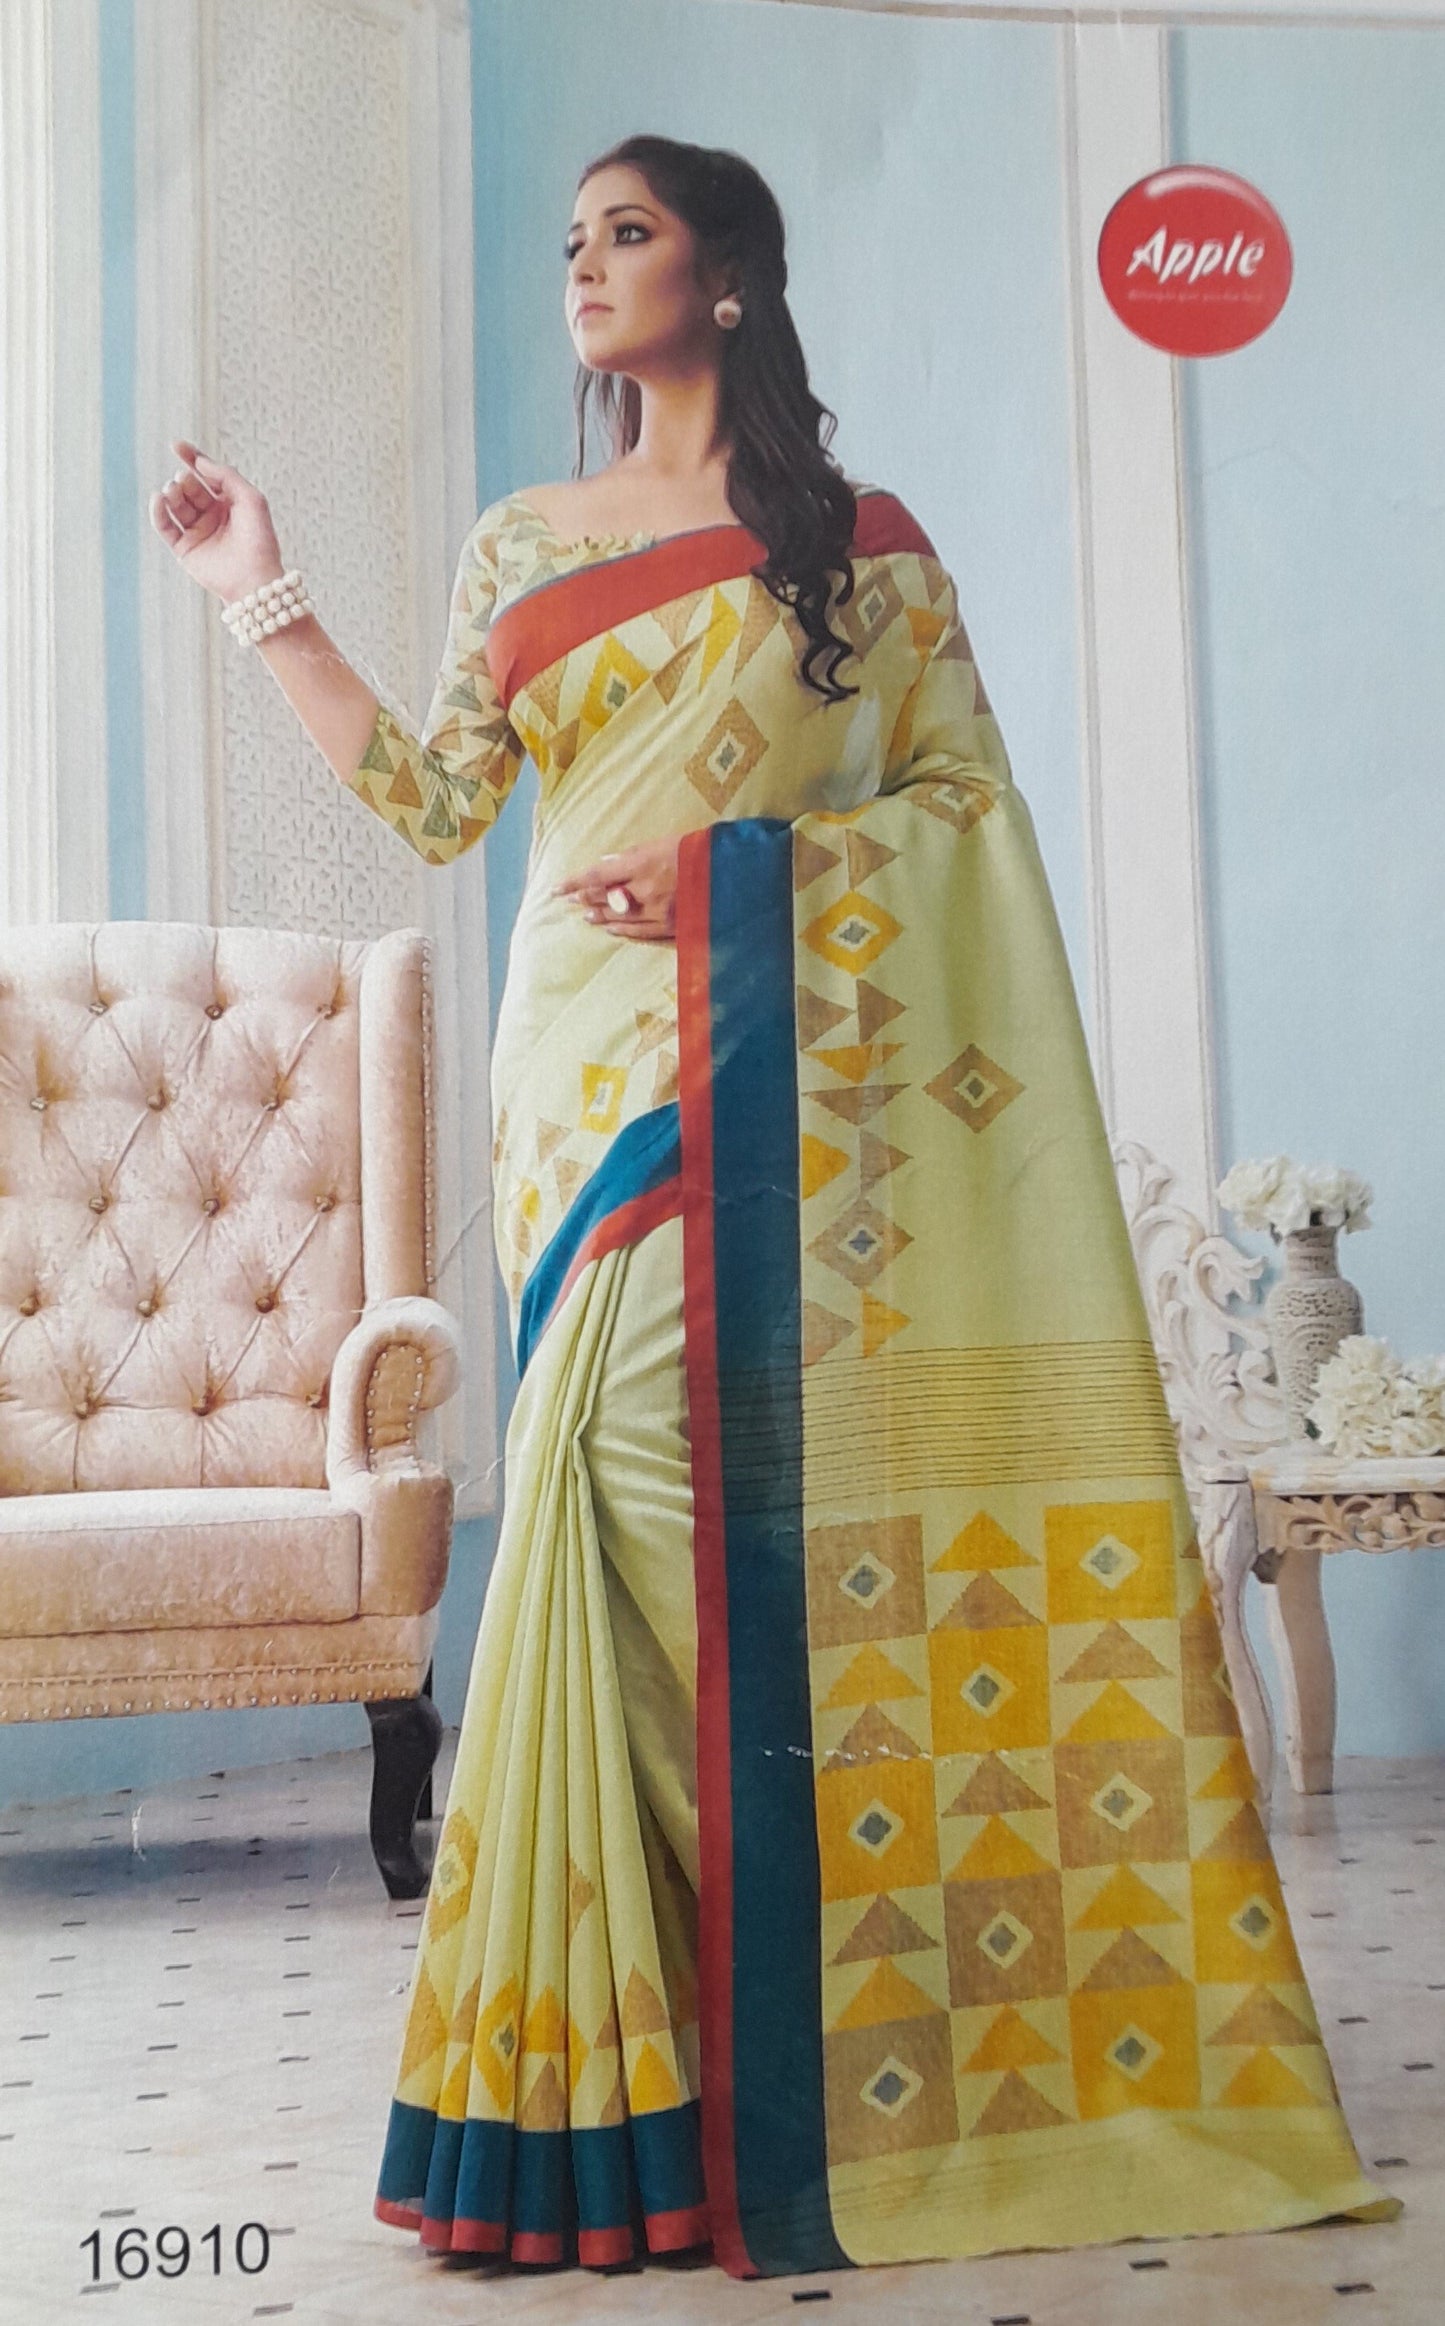 Classic Light Faun Saree With A Deep Brown & Bottle Green Border & Abstract Prints Around The Drape And Body , Stylish Self Blouse With Abstract Print - With Blouse - SonaMandir